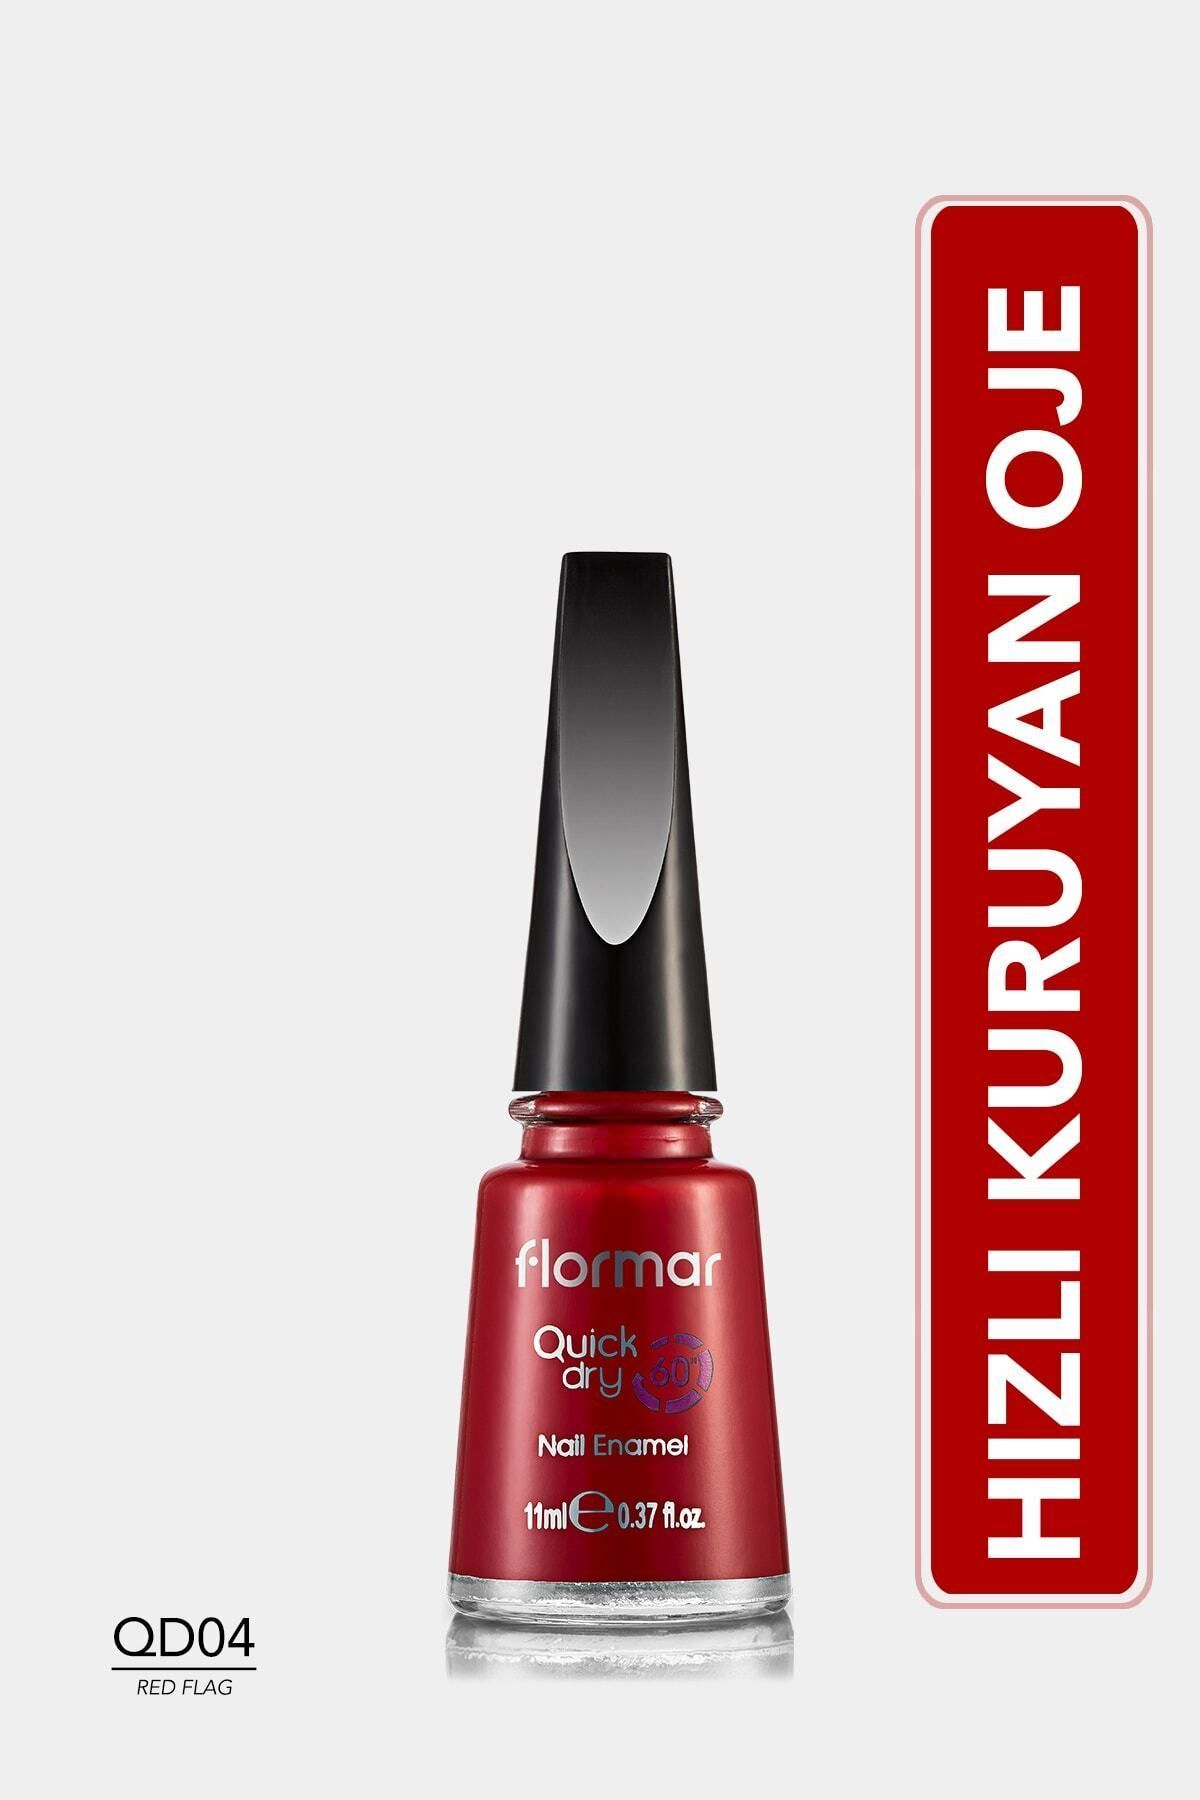 Flormar Quick Dry Red Flag 04 Oje